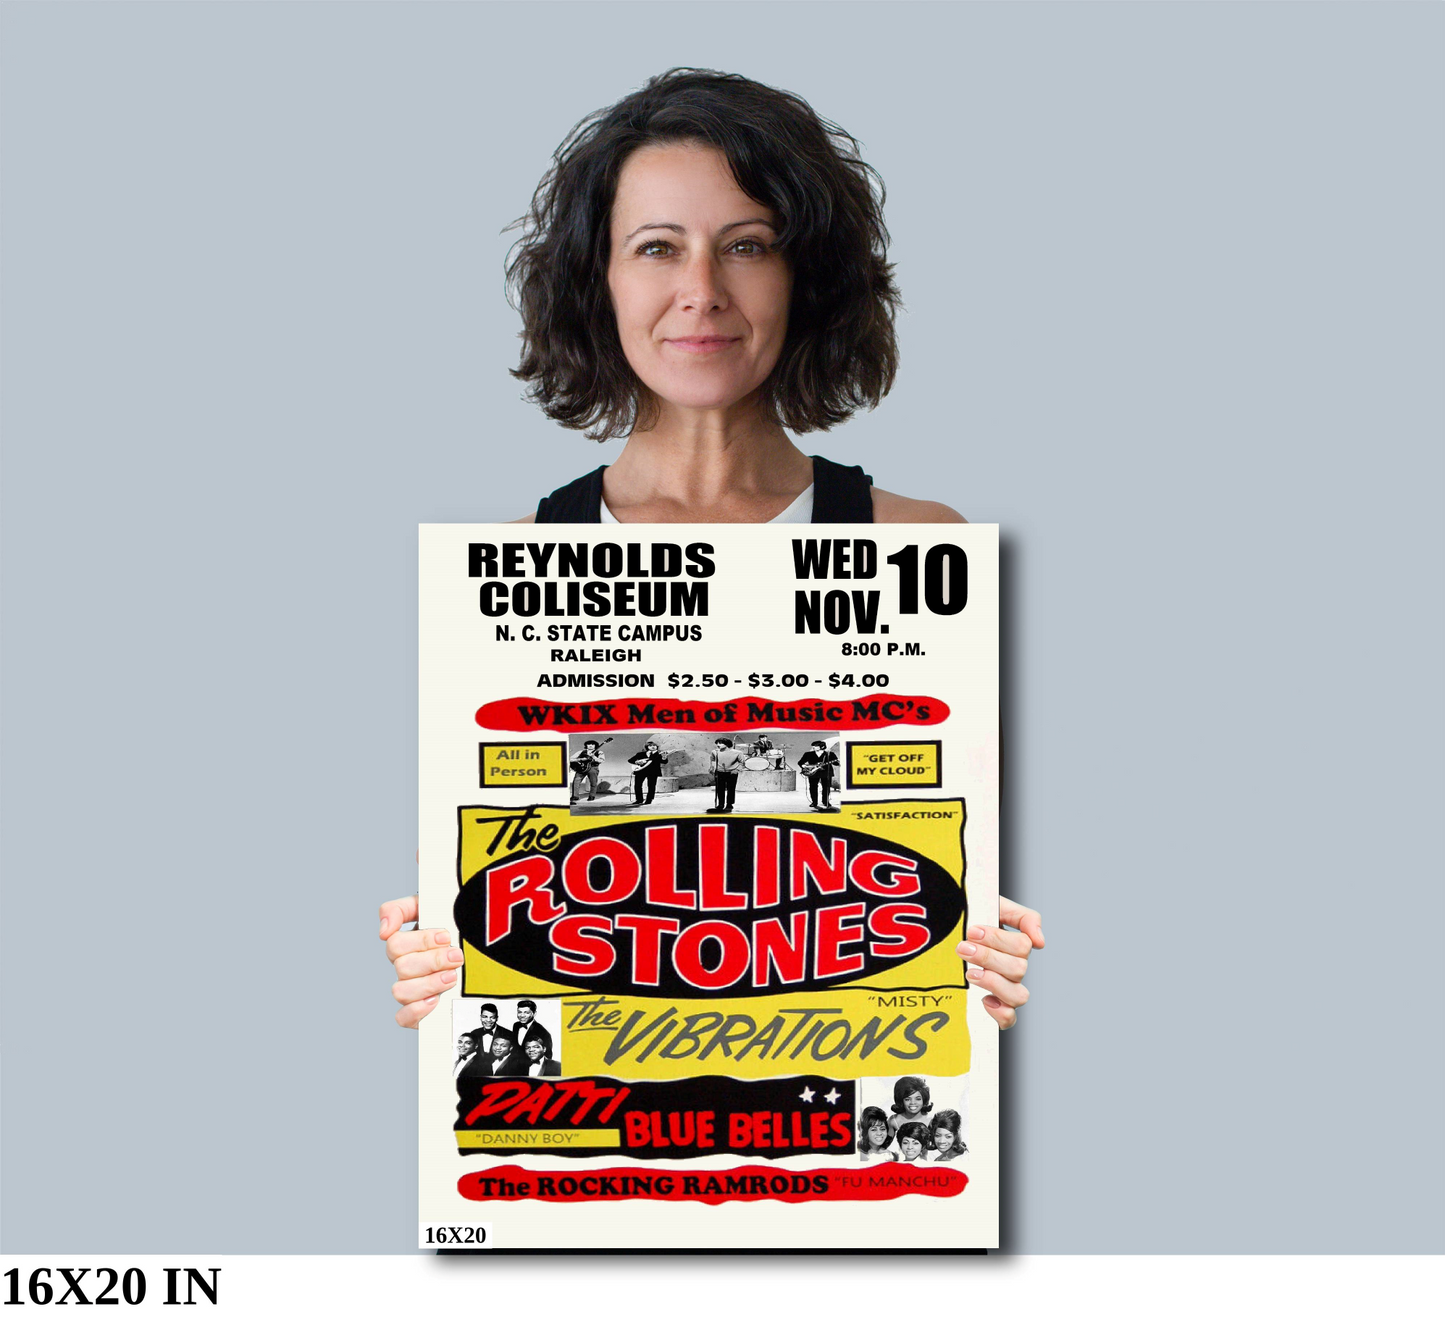 The Rolling Stones concert poster